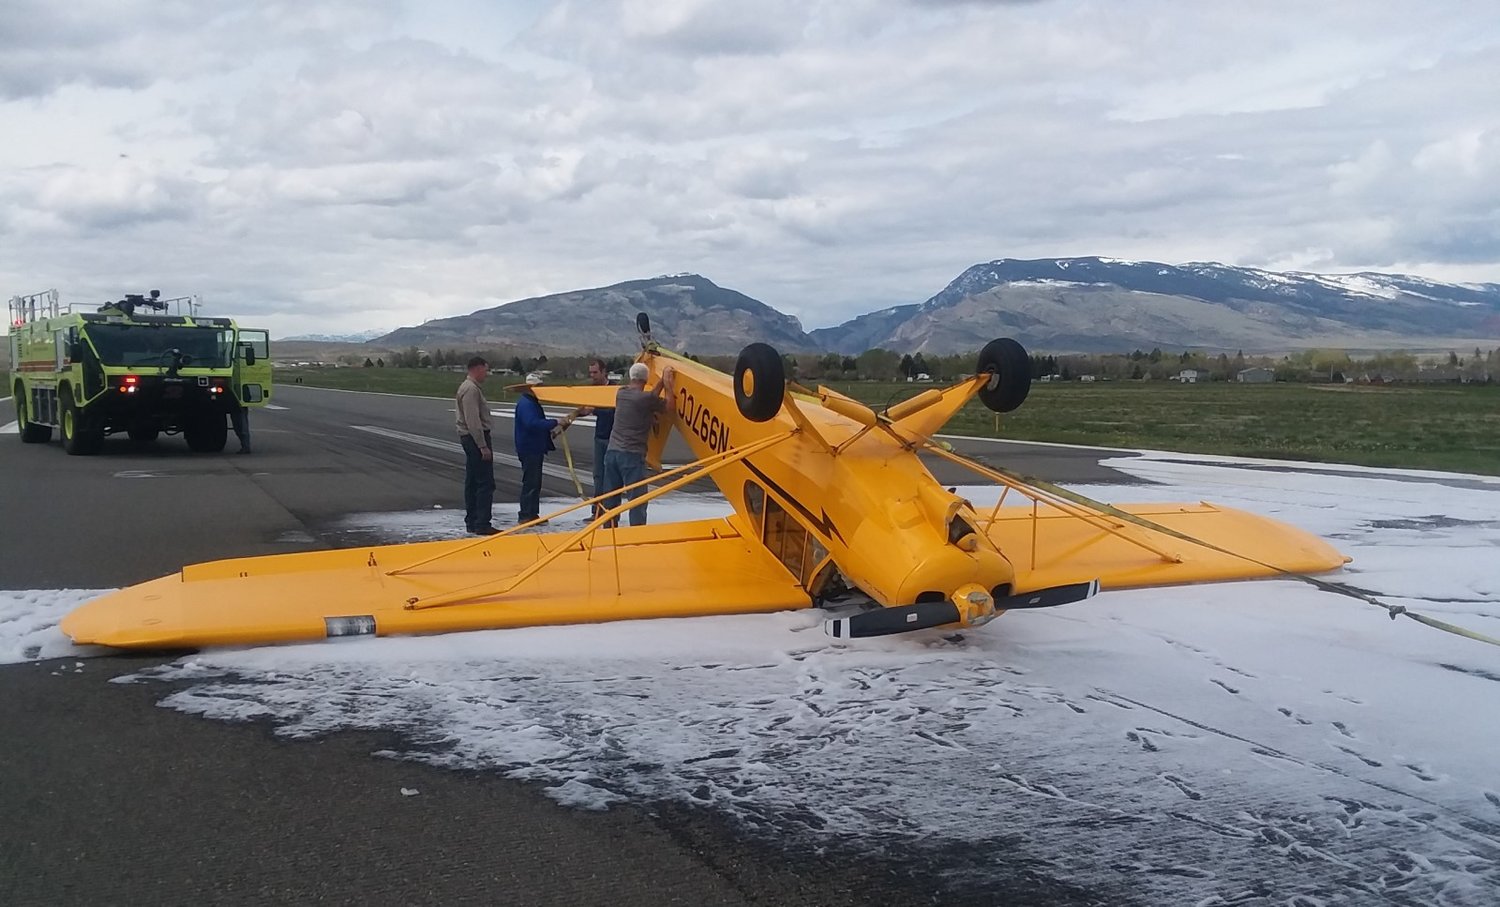 A Piper Cub rests upside down on the Yellowstone Regional Airport runway on Saturday morning, after flipping over during landing.